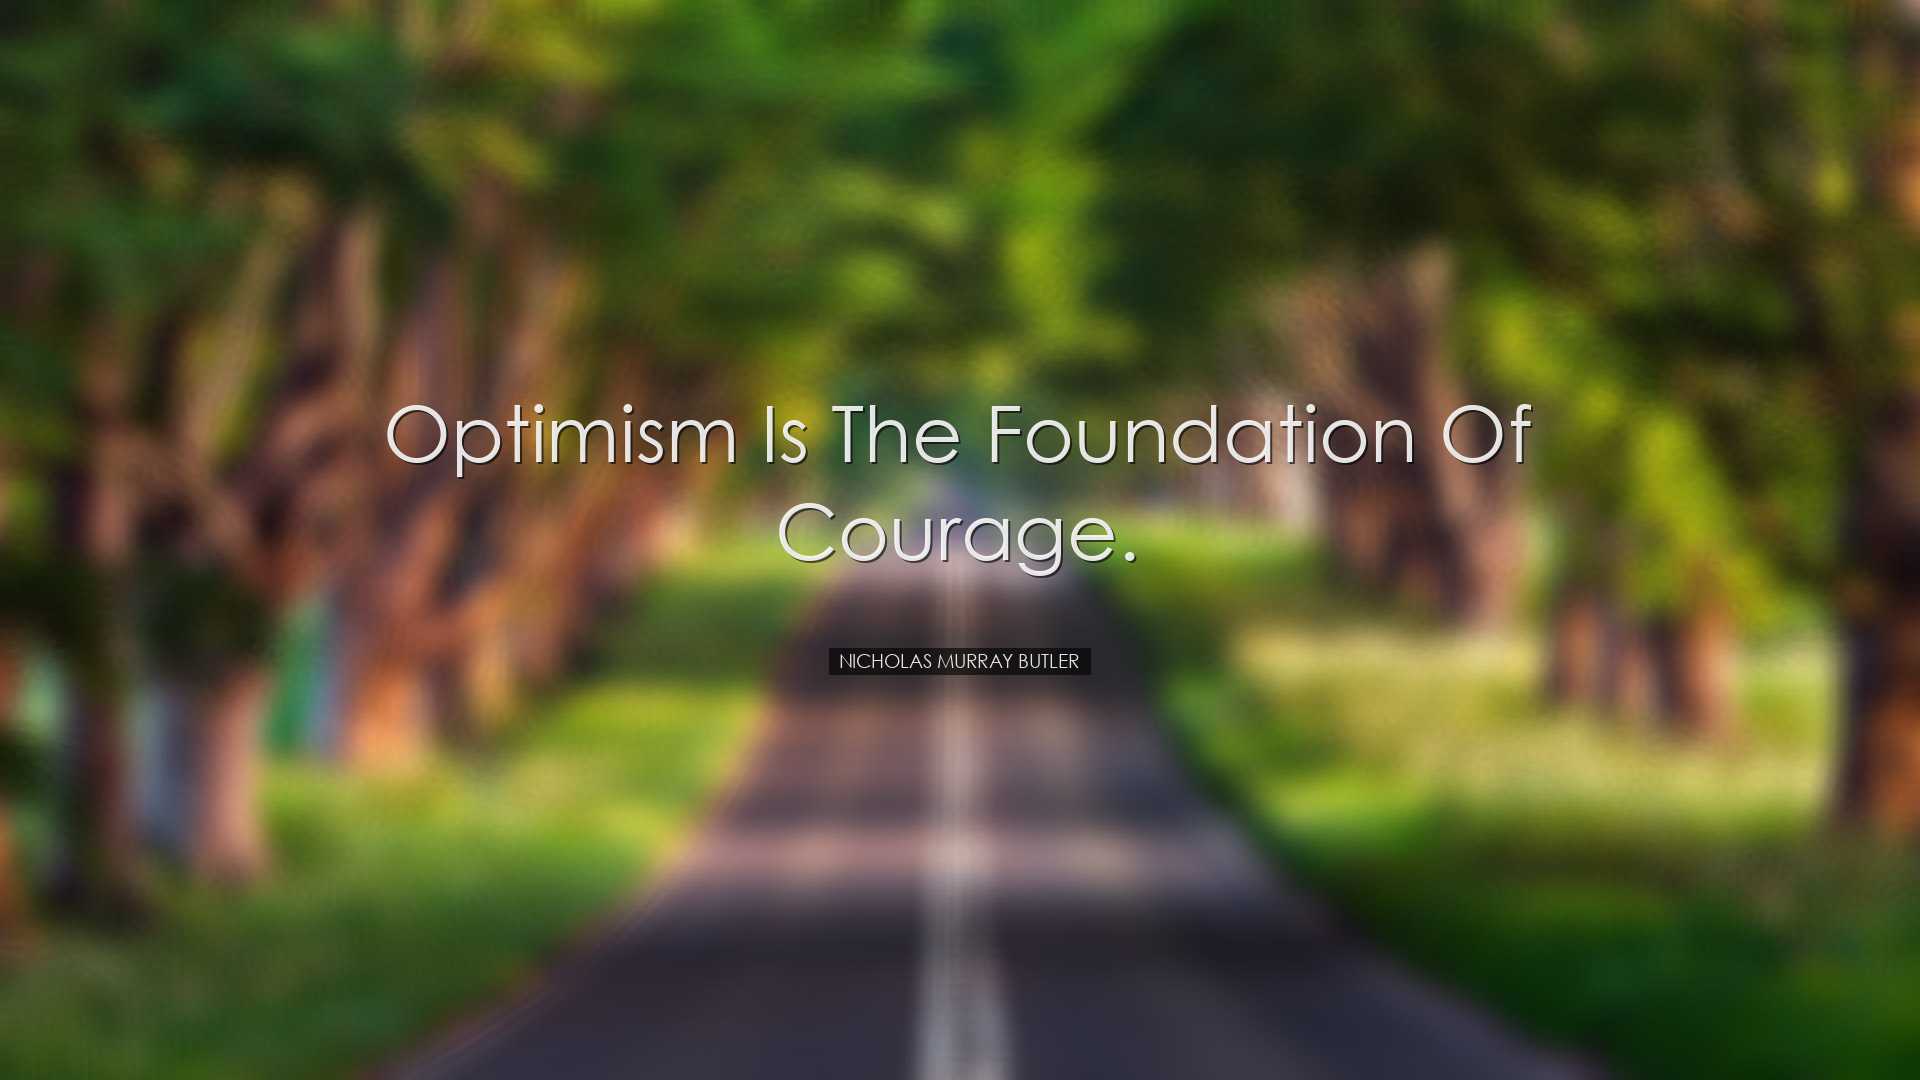 Optimism is the foundation of courage. - Nicholas Murray Butler